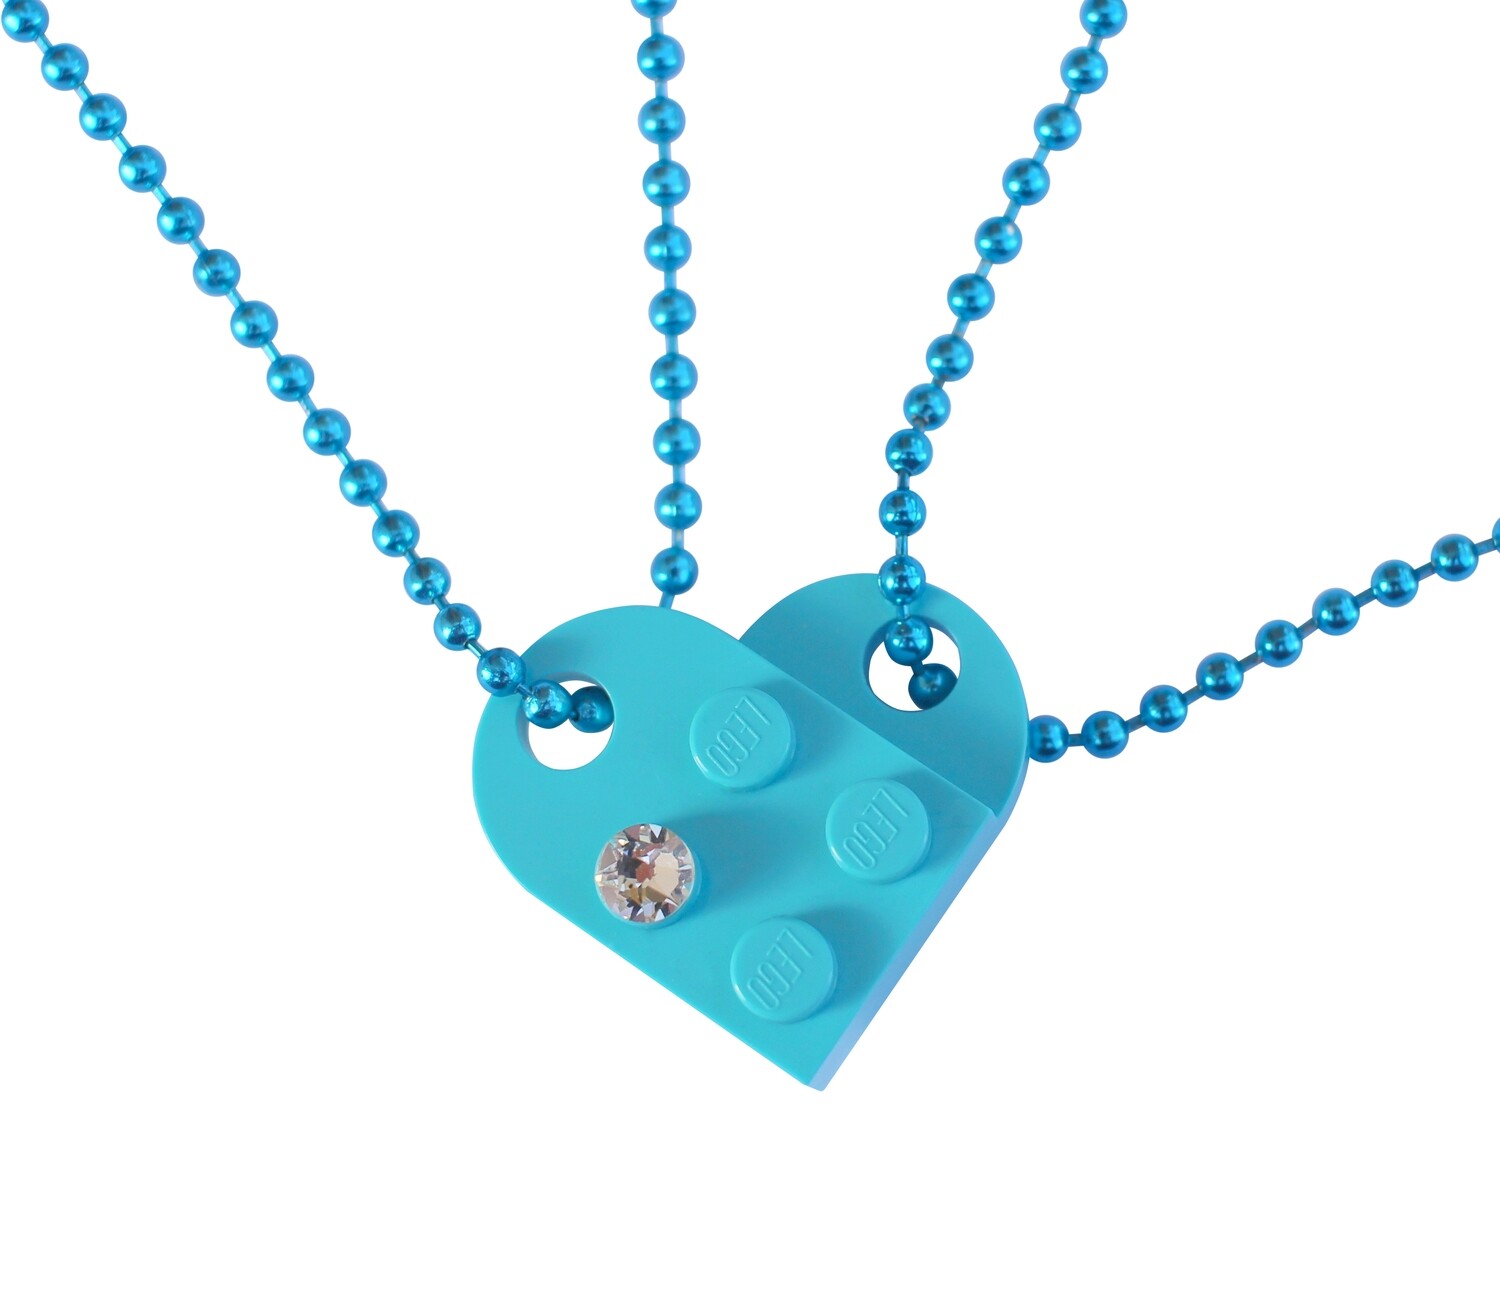 Turquoise Blue 2 piece customizable LEGO® heart made from 2 LEGO® plates with a 'Diamond' color SWAROVSKI® crystal on 2 Blue ballchains